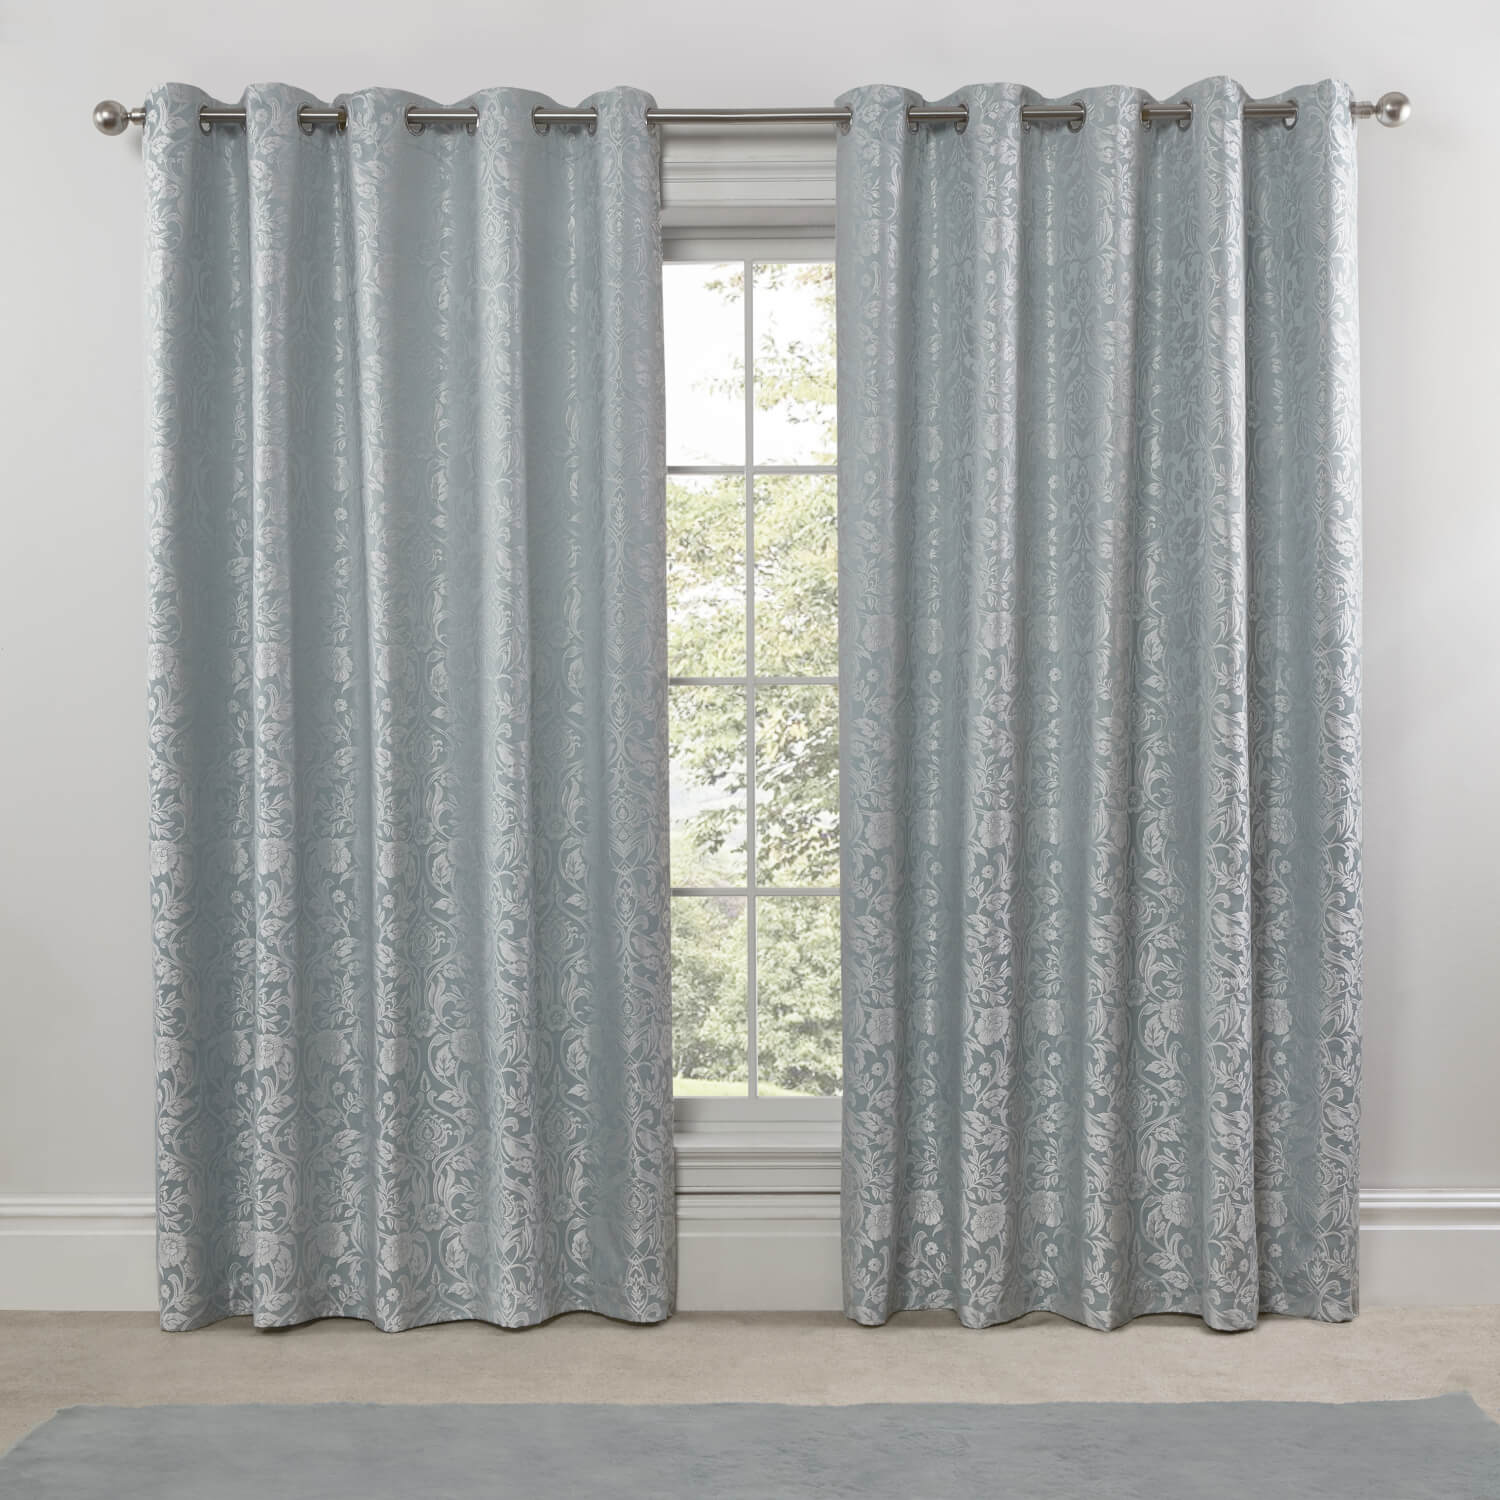 Maison By Emma Barclay Lined Eyelet Jacquard Curtains - Duck Egg 4 Shaws Department Stores